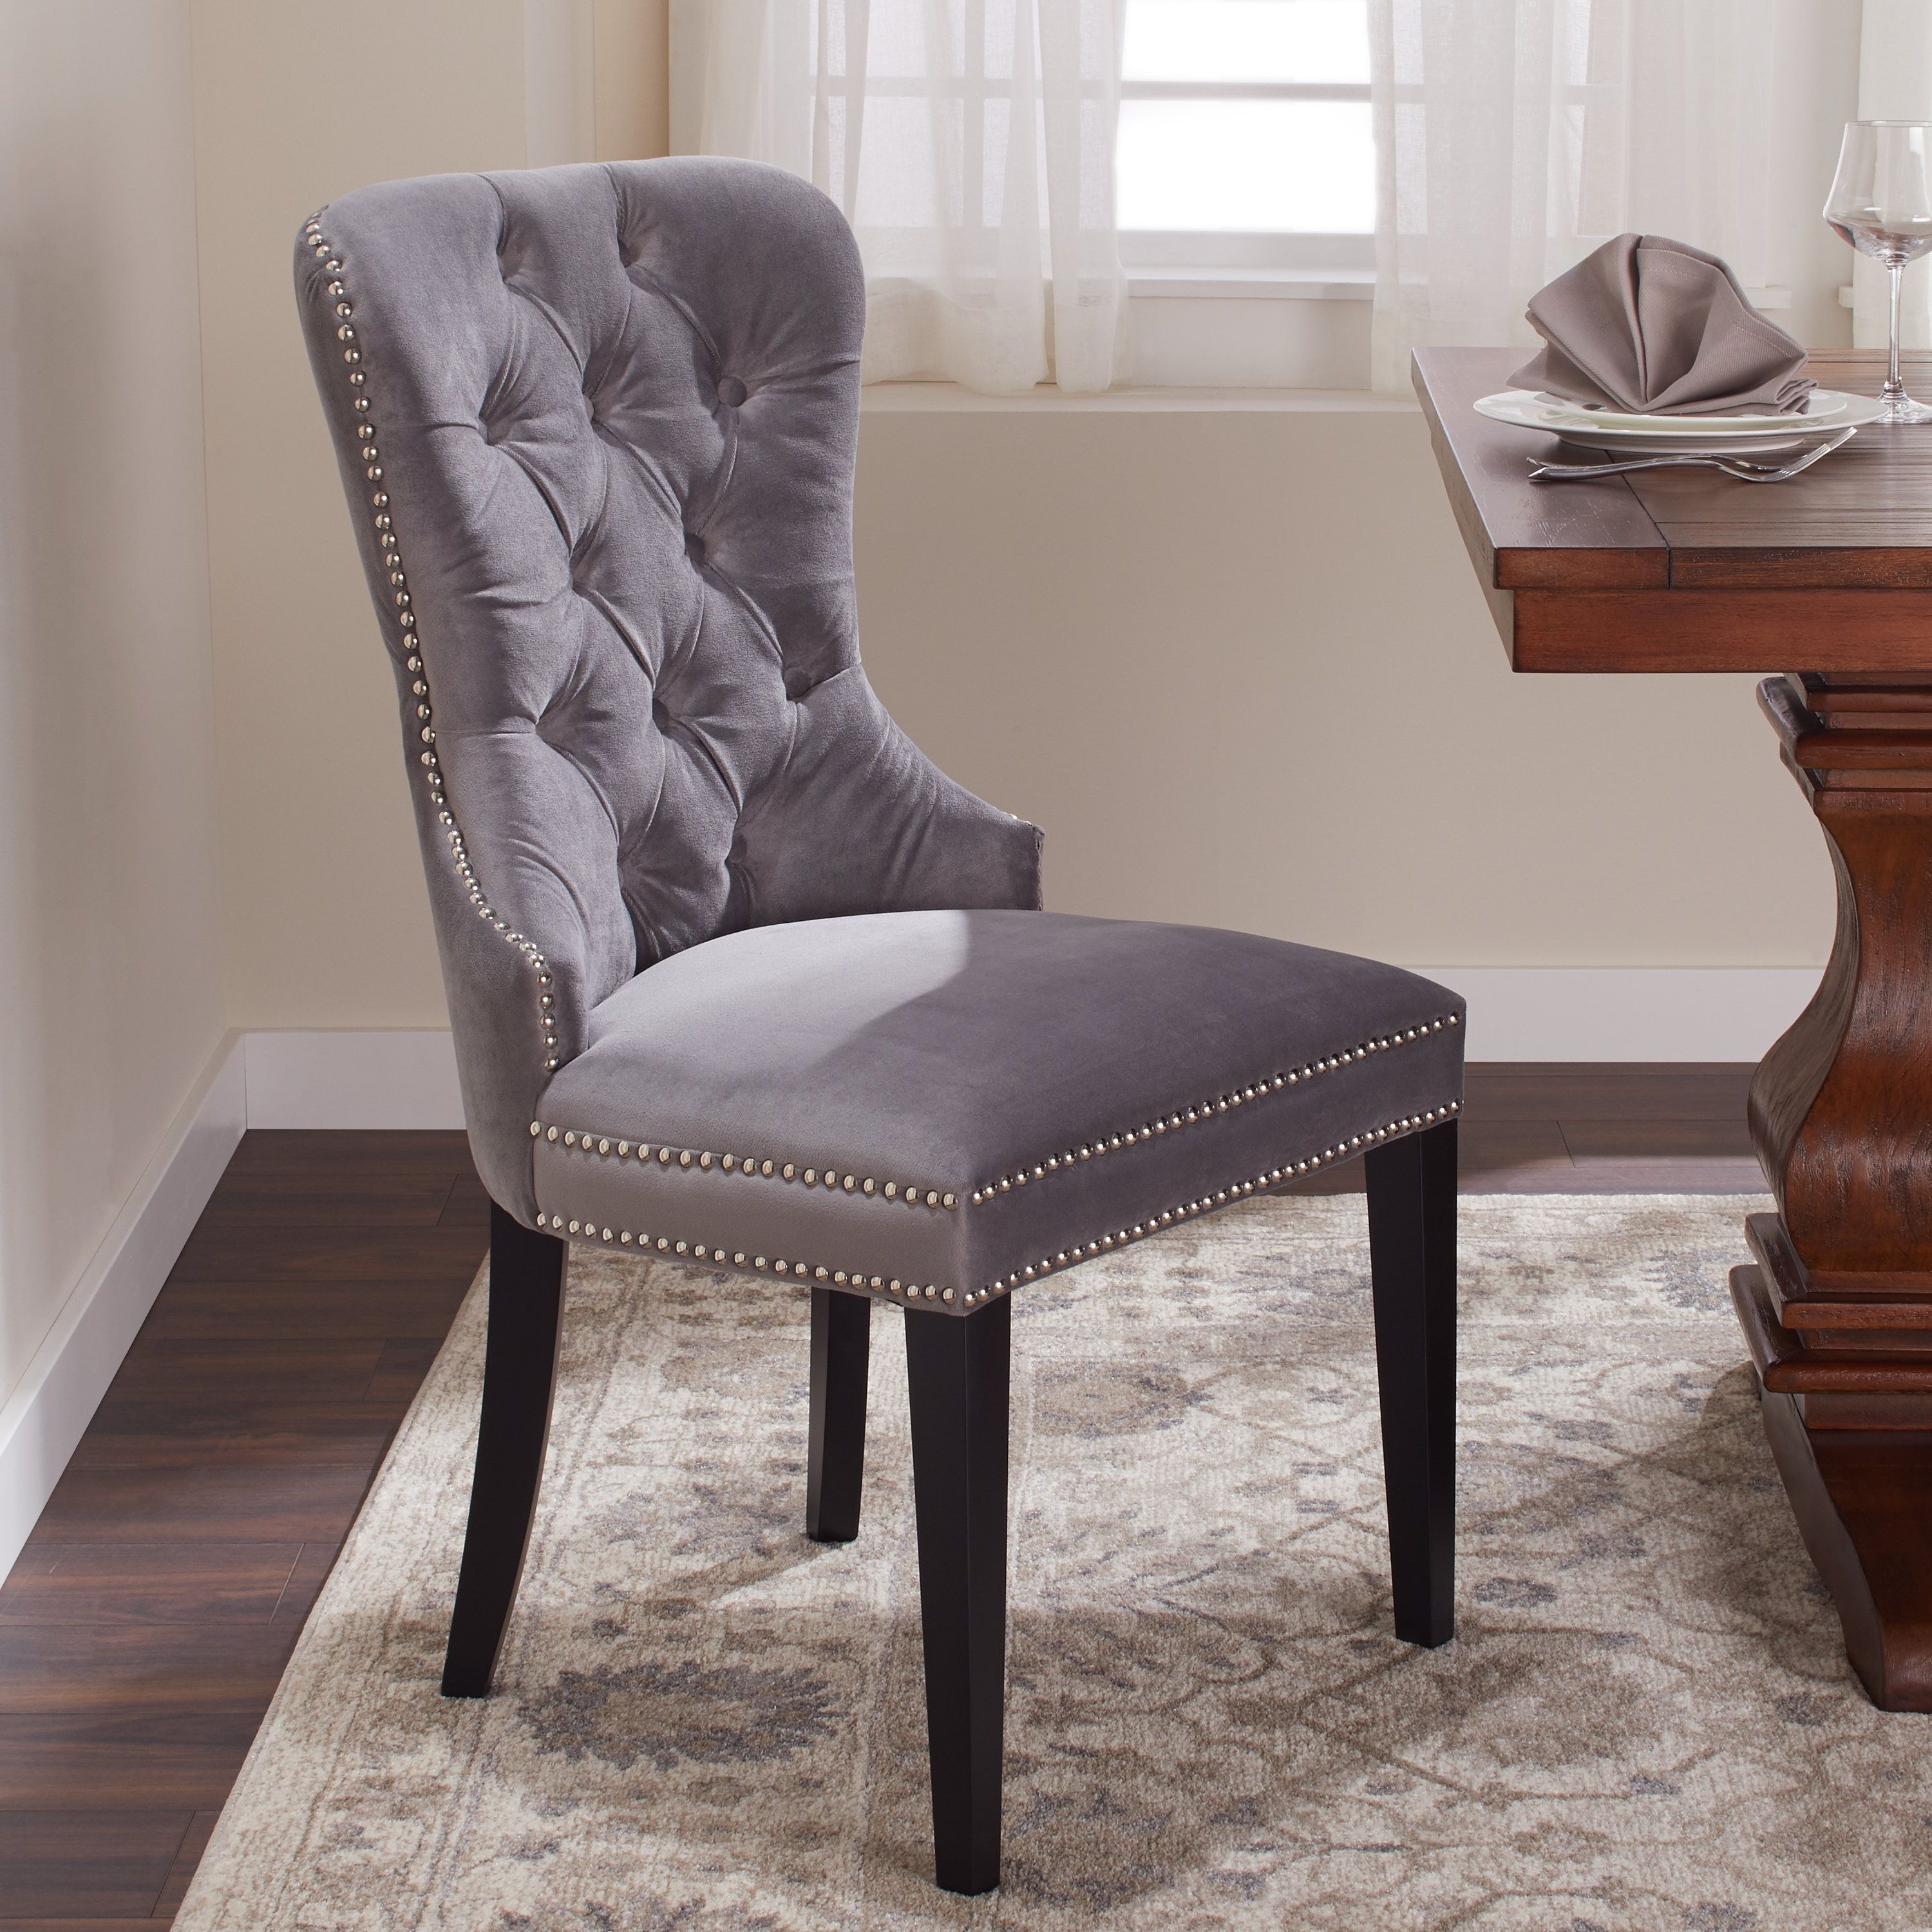 Grey Dining Chairs Regarding Most Up To Date Shop Abbyson Versailles Grey Tufted Dining Chair – On Sale – Free (View 5 of 20)